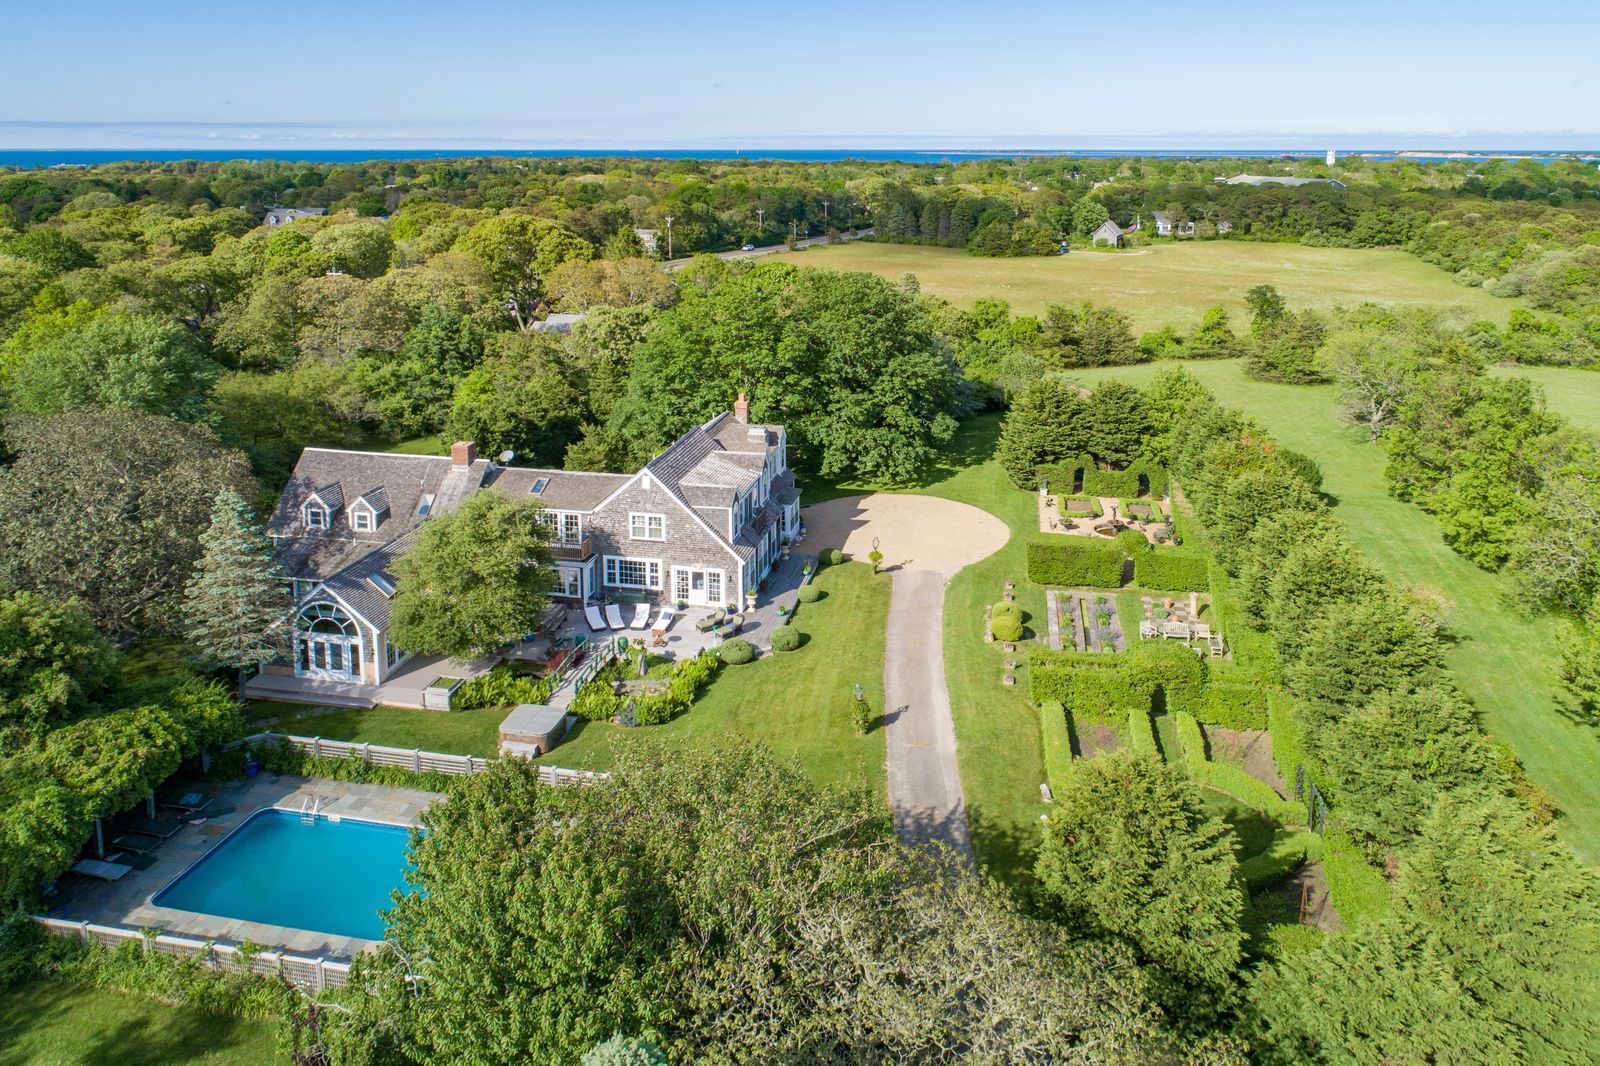 This picture-postcard property on five acres in the historic seaside resort of Martha’s Vineyard comprises three Shingle-style residences, a swimming pool, and formal gardens.